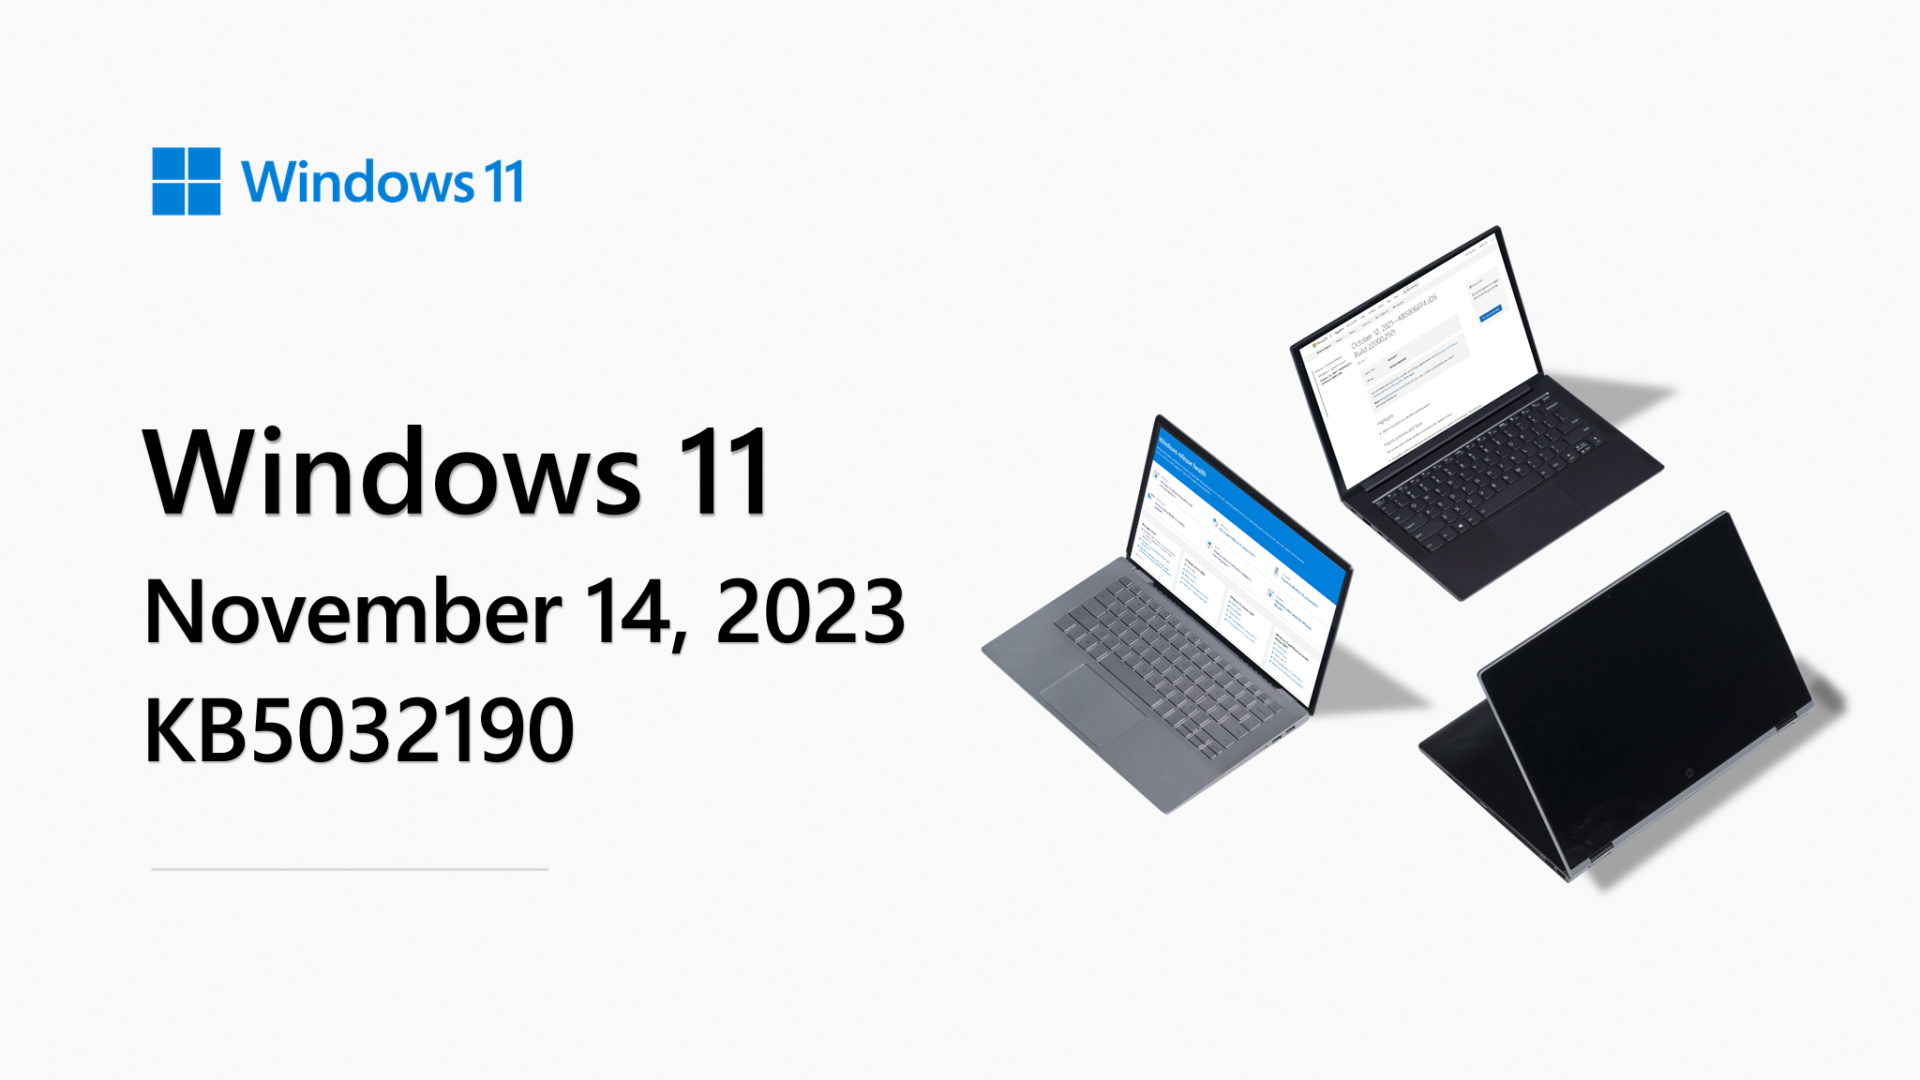 Microsoft confirms Windows 10 22H2 as final version. Steps to shift on  Windows 11